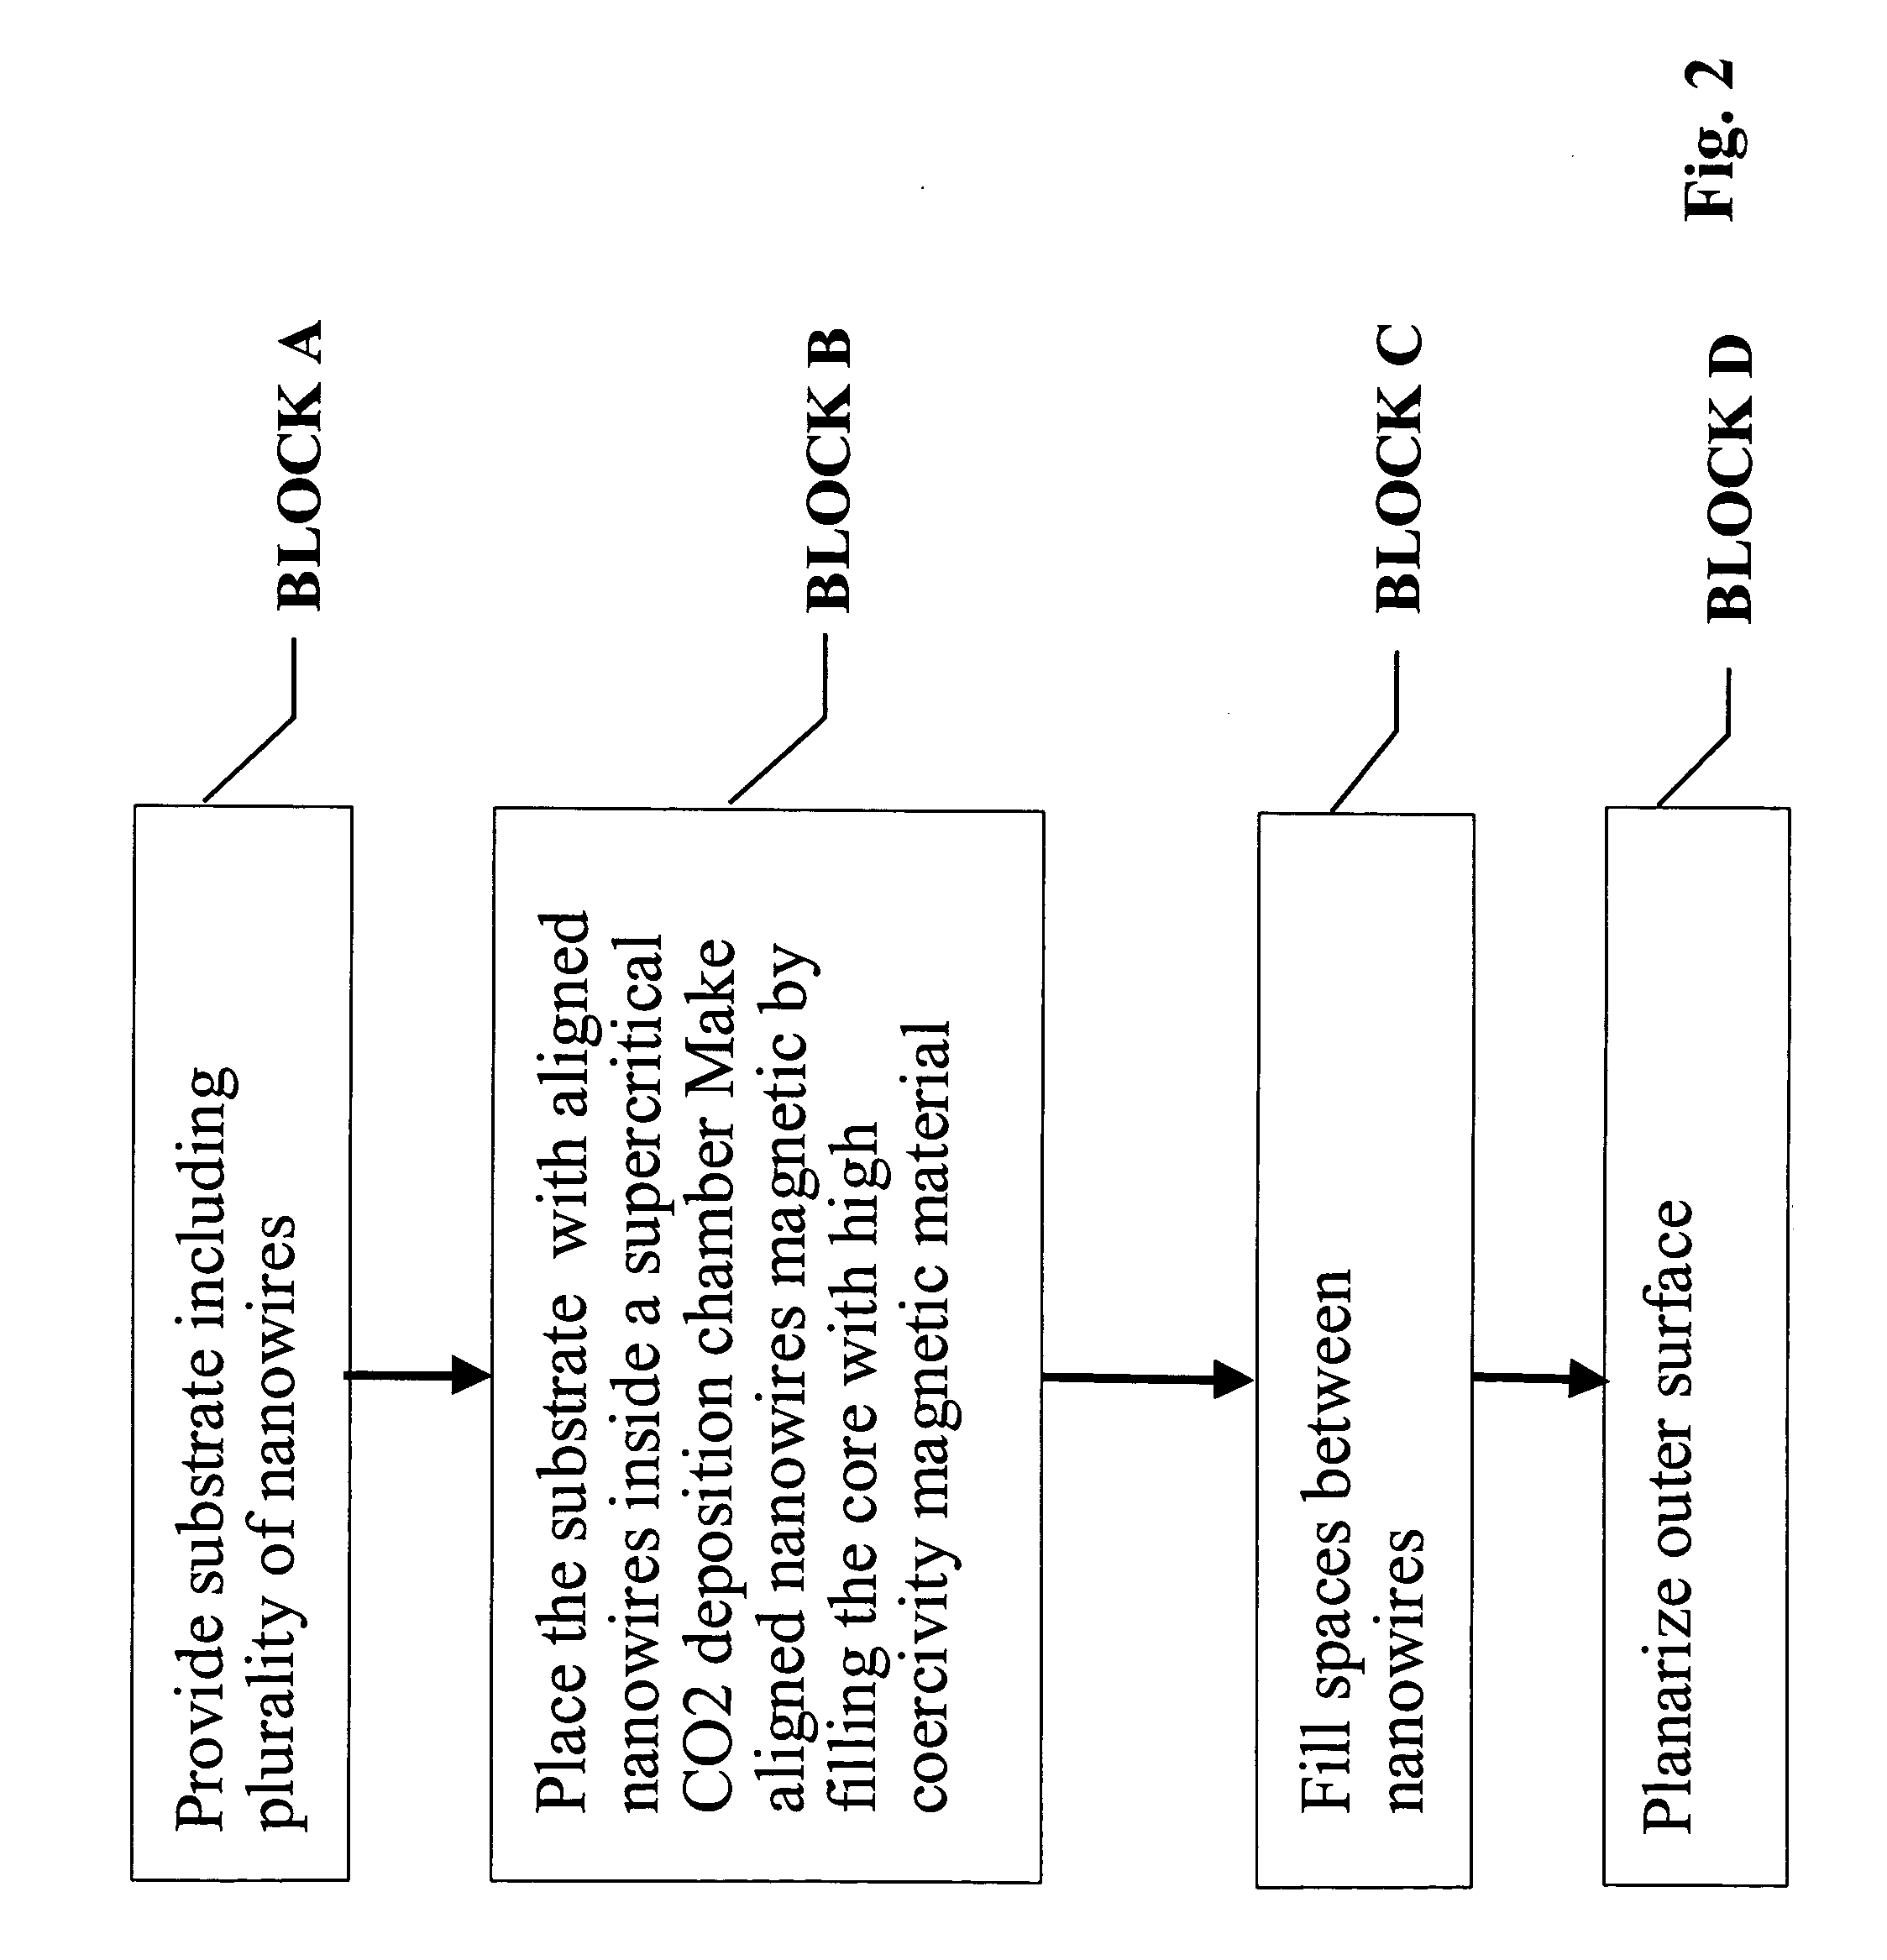 Ultra-high-density magnetic recording media and methods for making the same